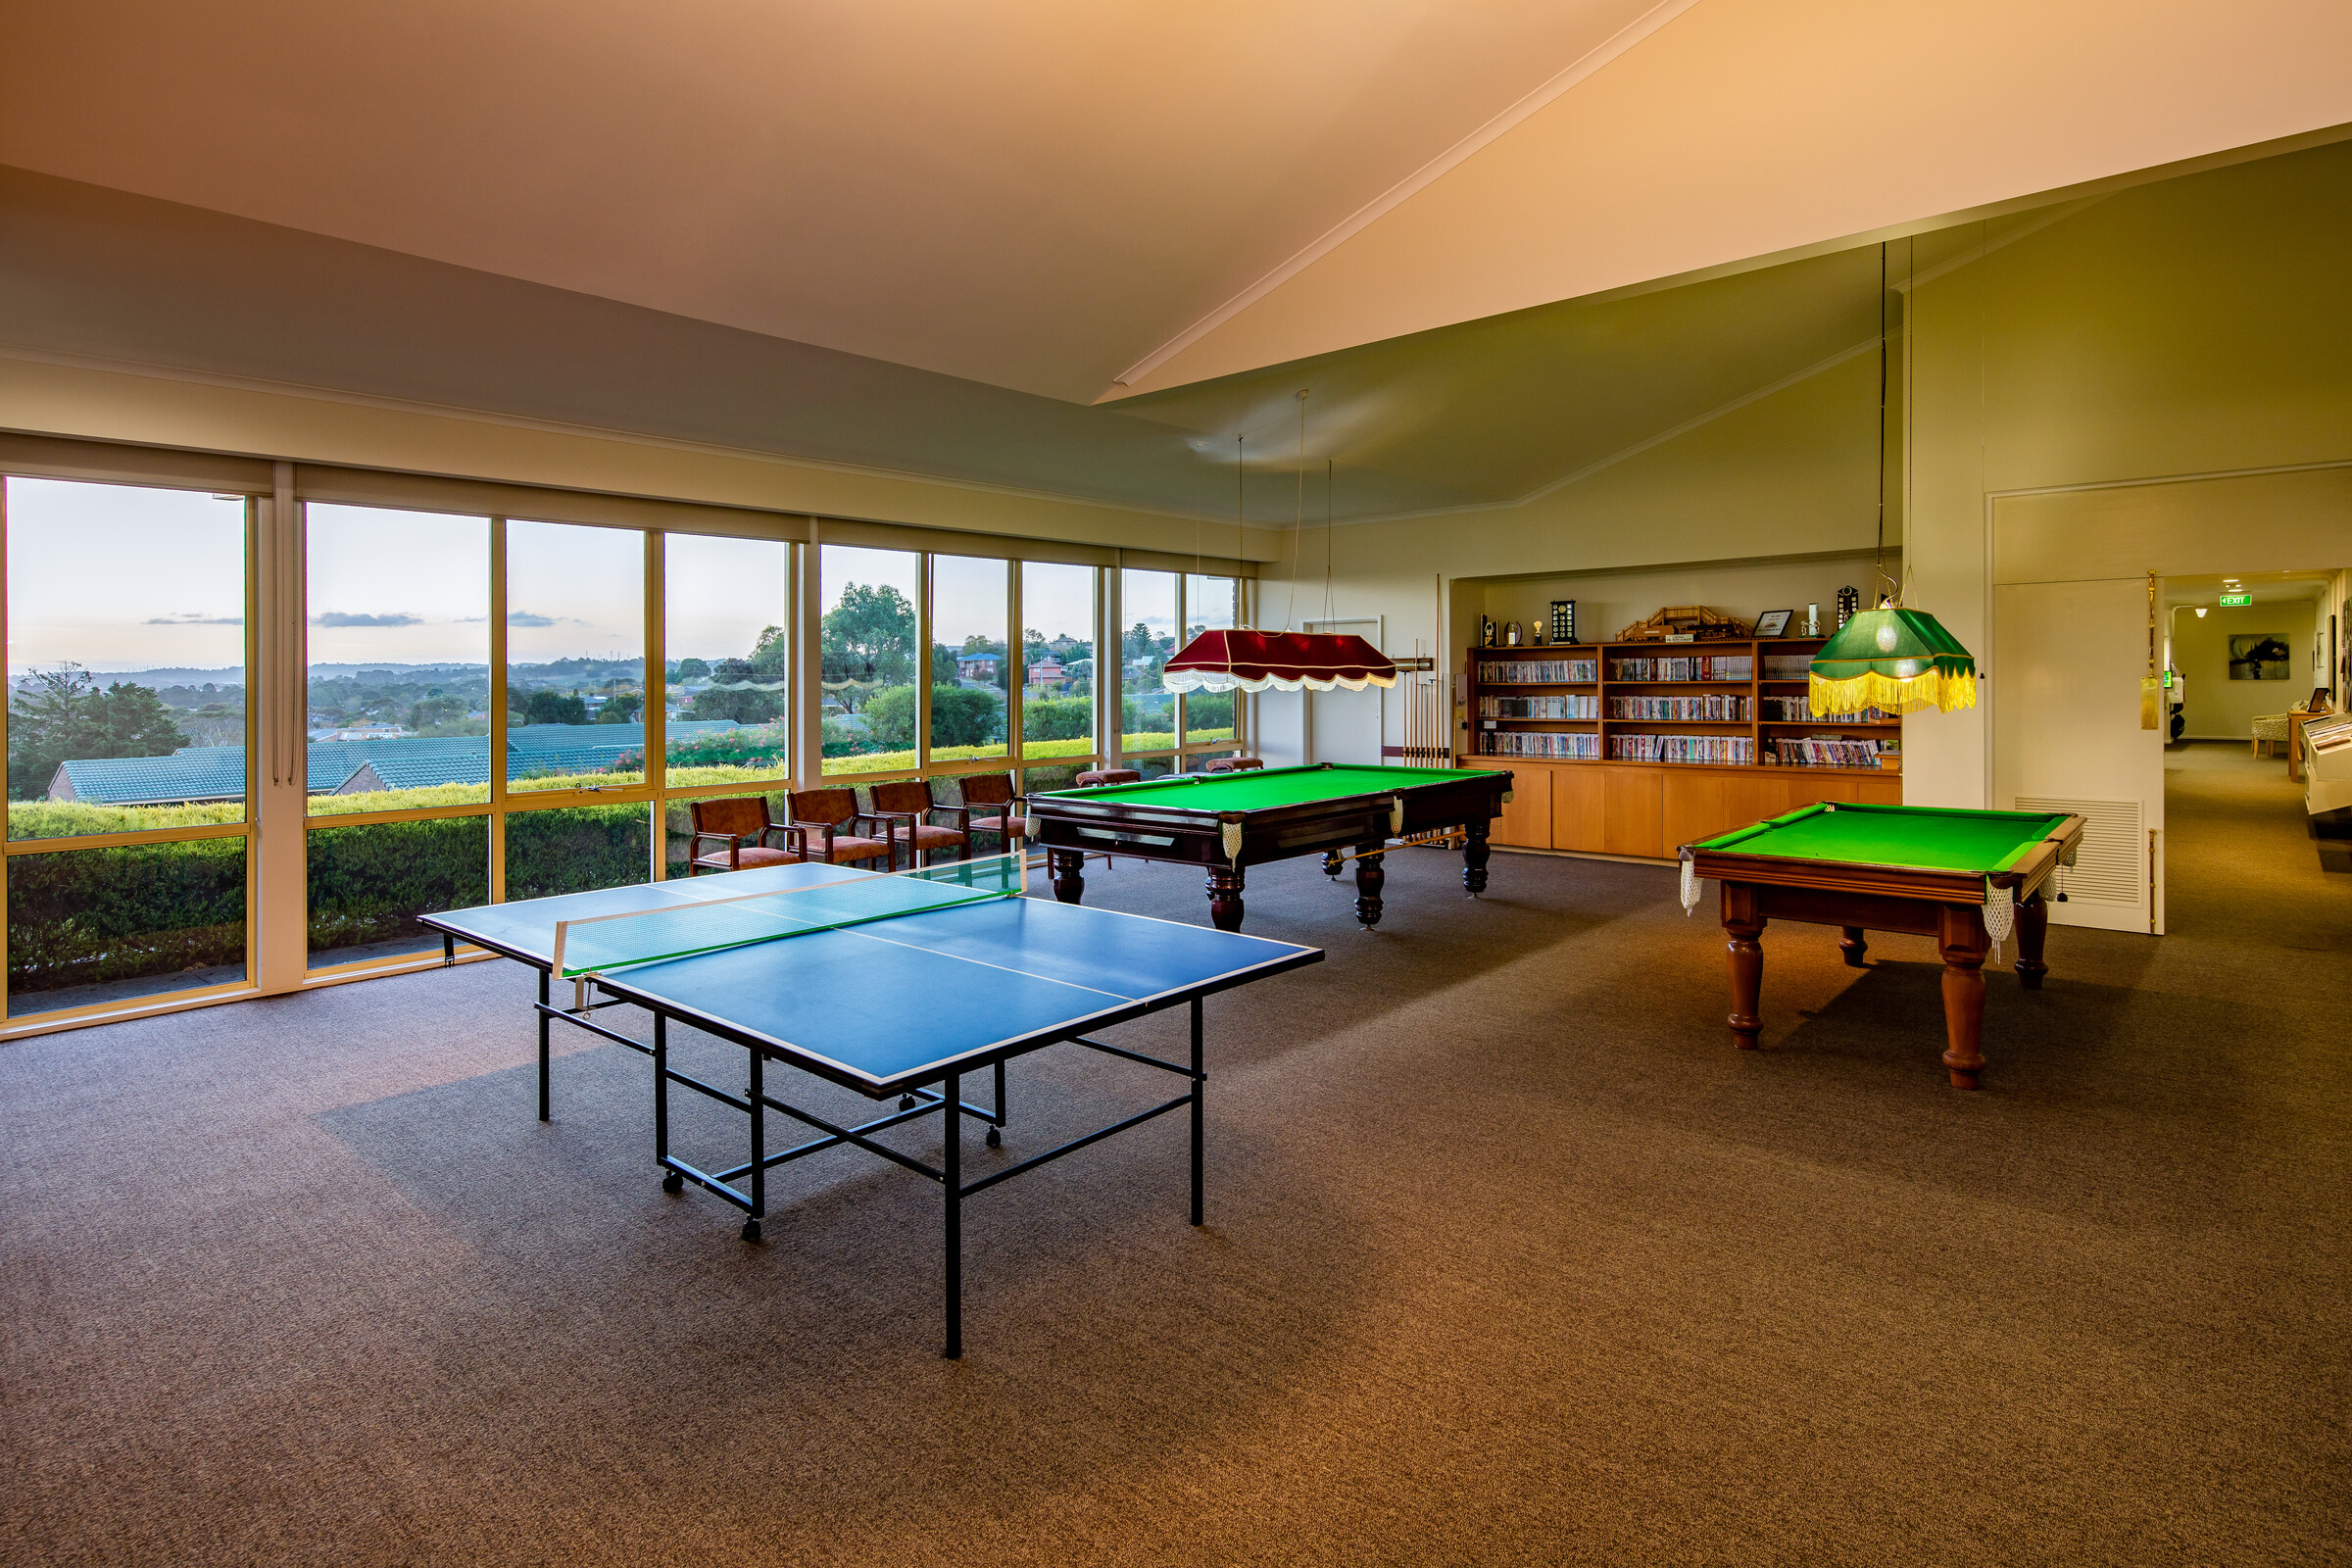 Meadowvale Village two pool tables and table tennis game area with bookcase on wall